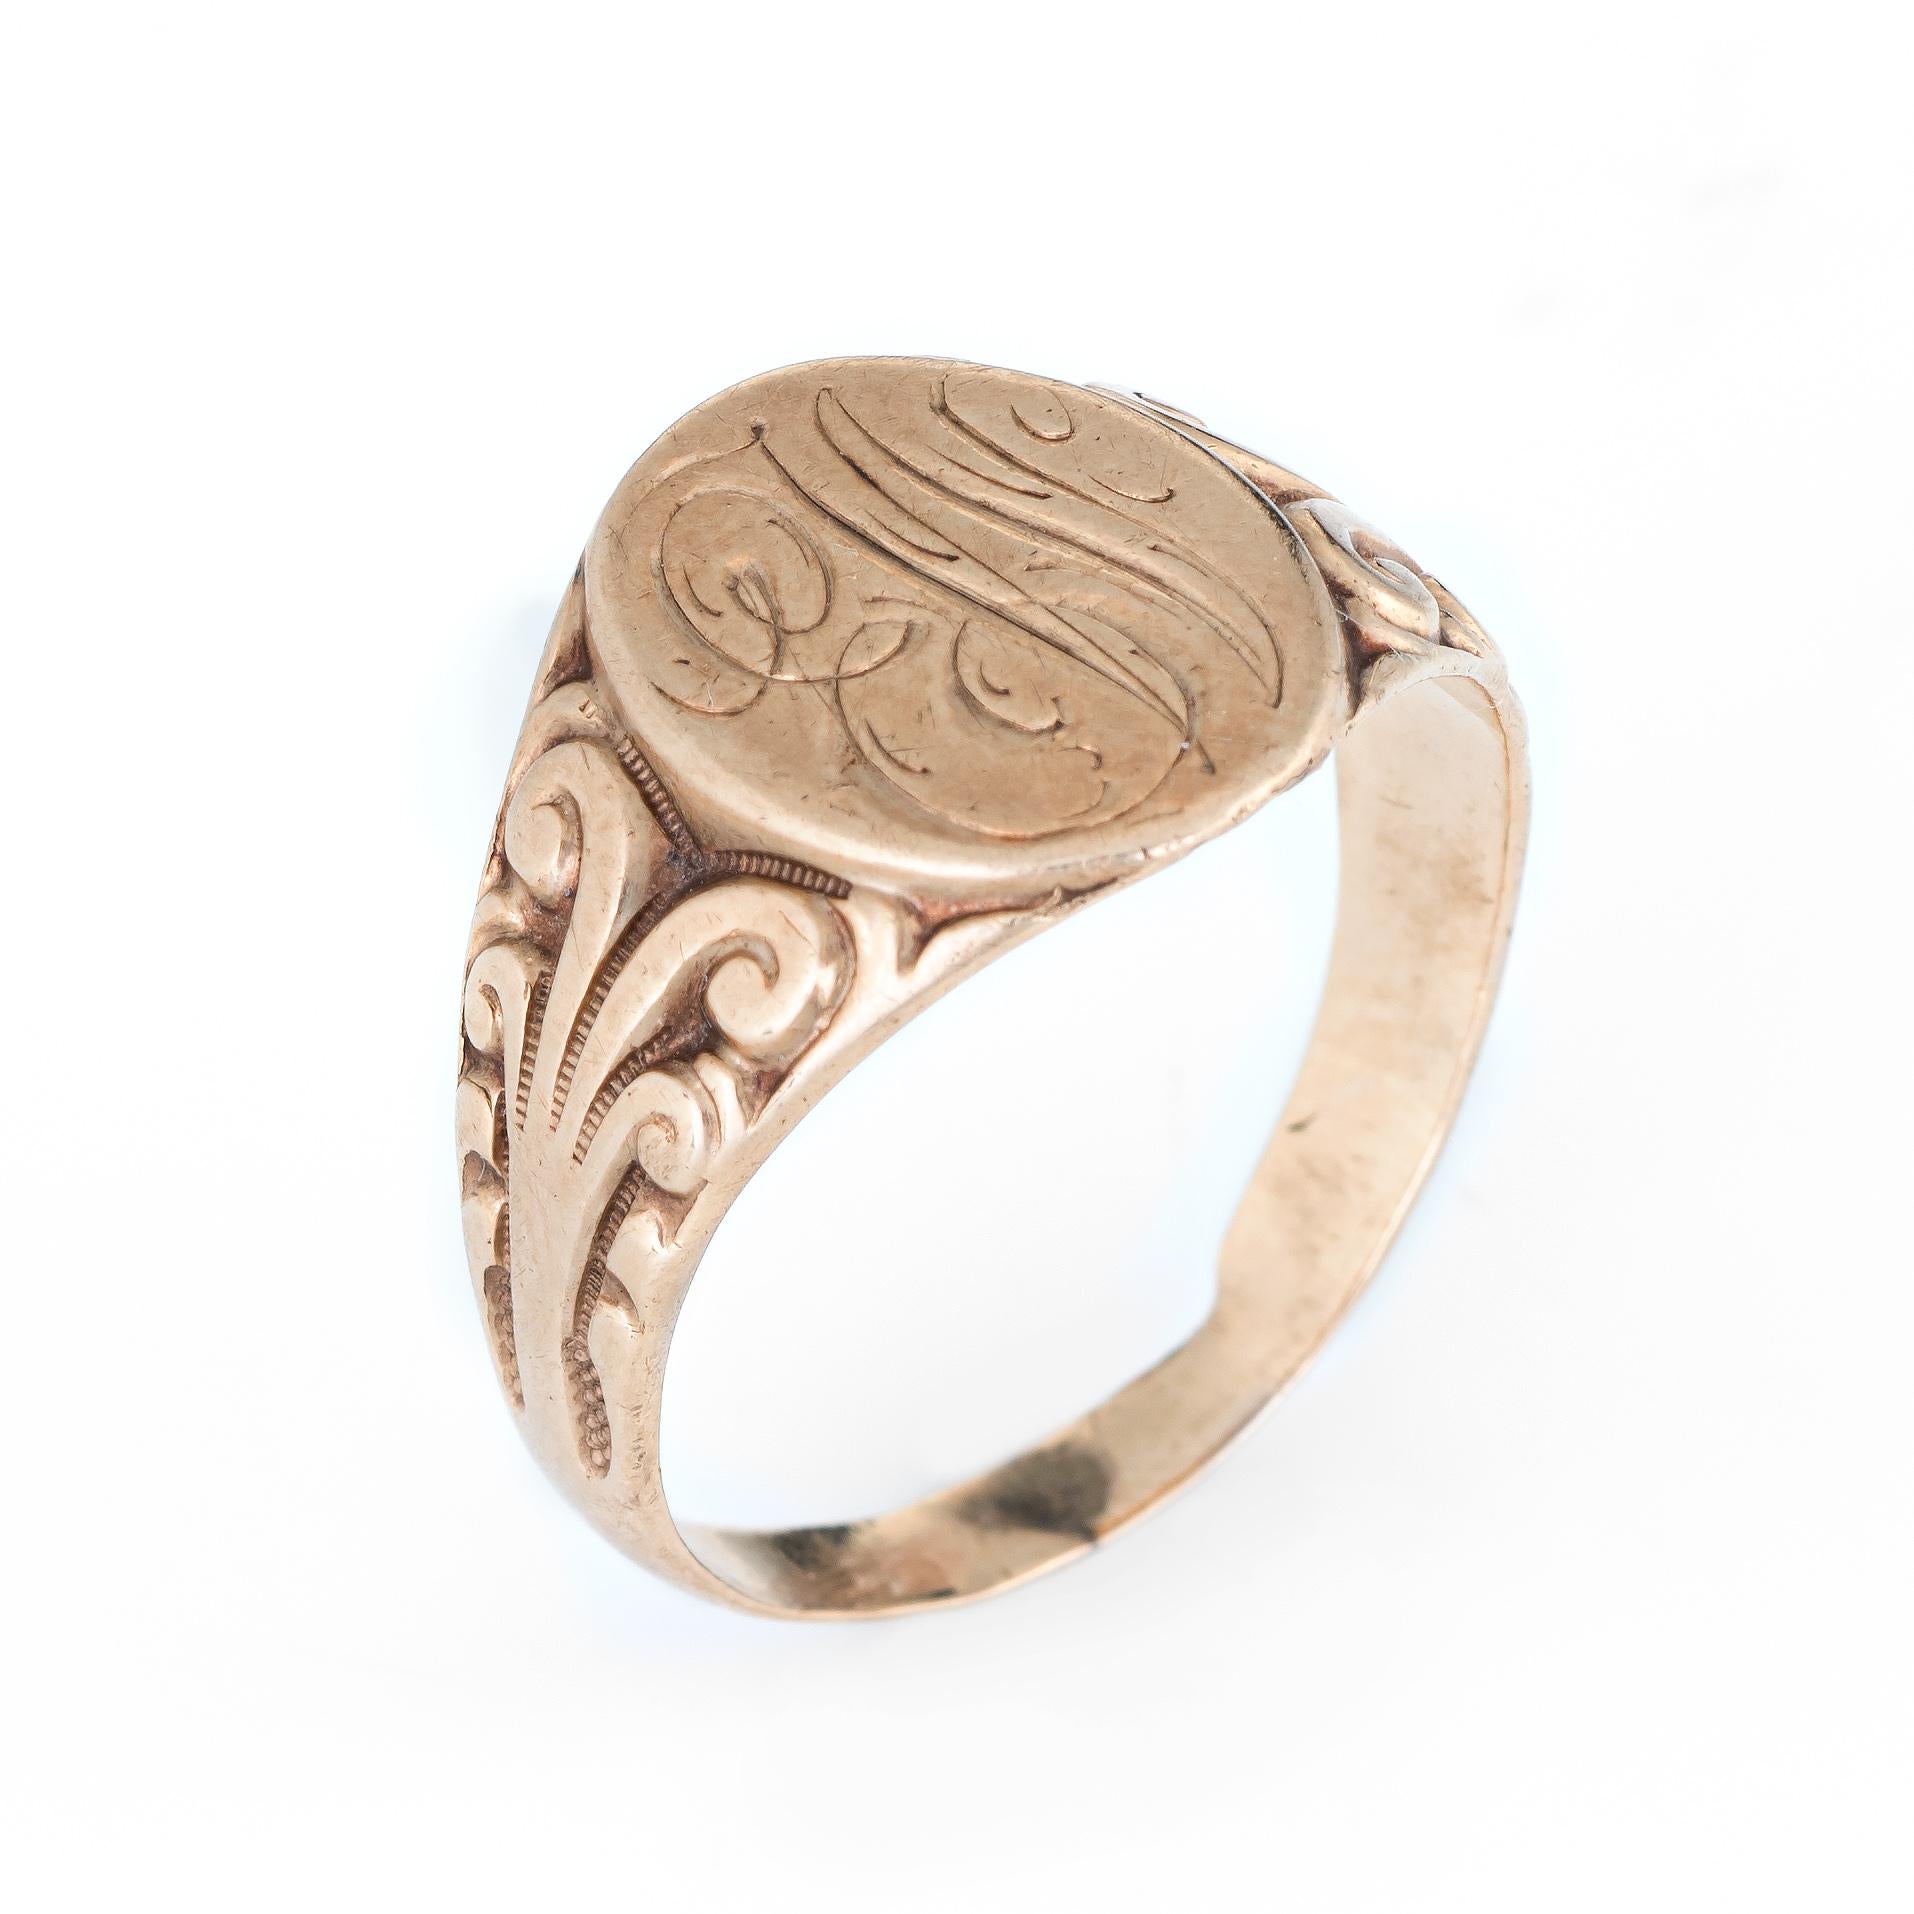 Lovely antique Victorian signet ring (circa 1880s to 1900s), crafted in 14 karat yellow gold. 

The center oval is inscribed (from what we can decipher) the letters 